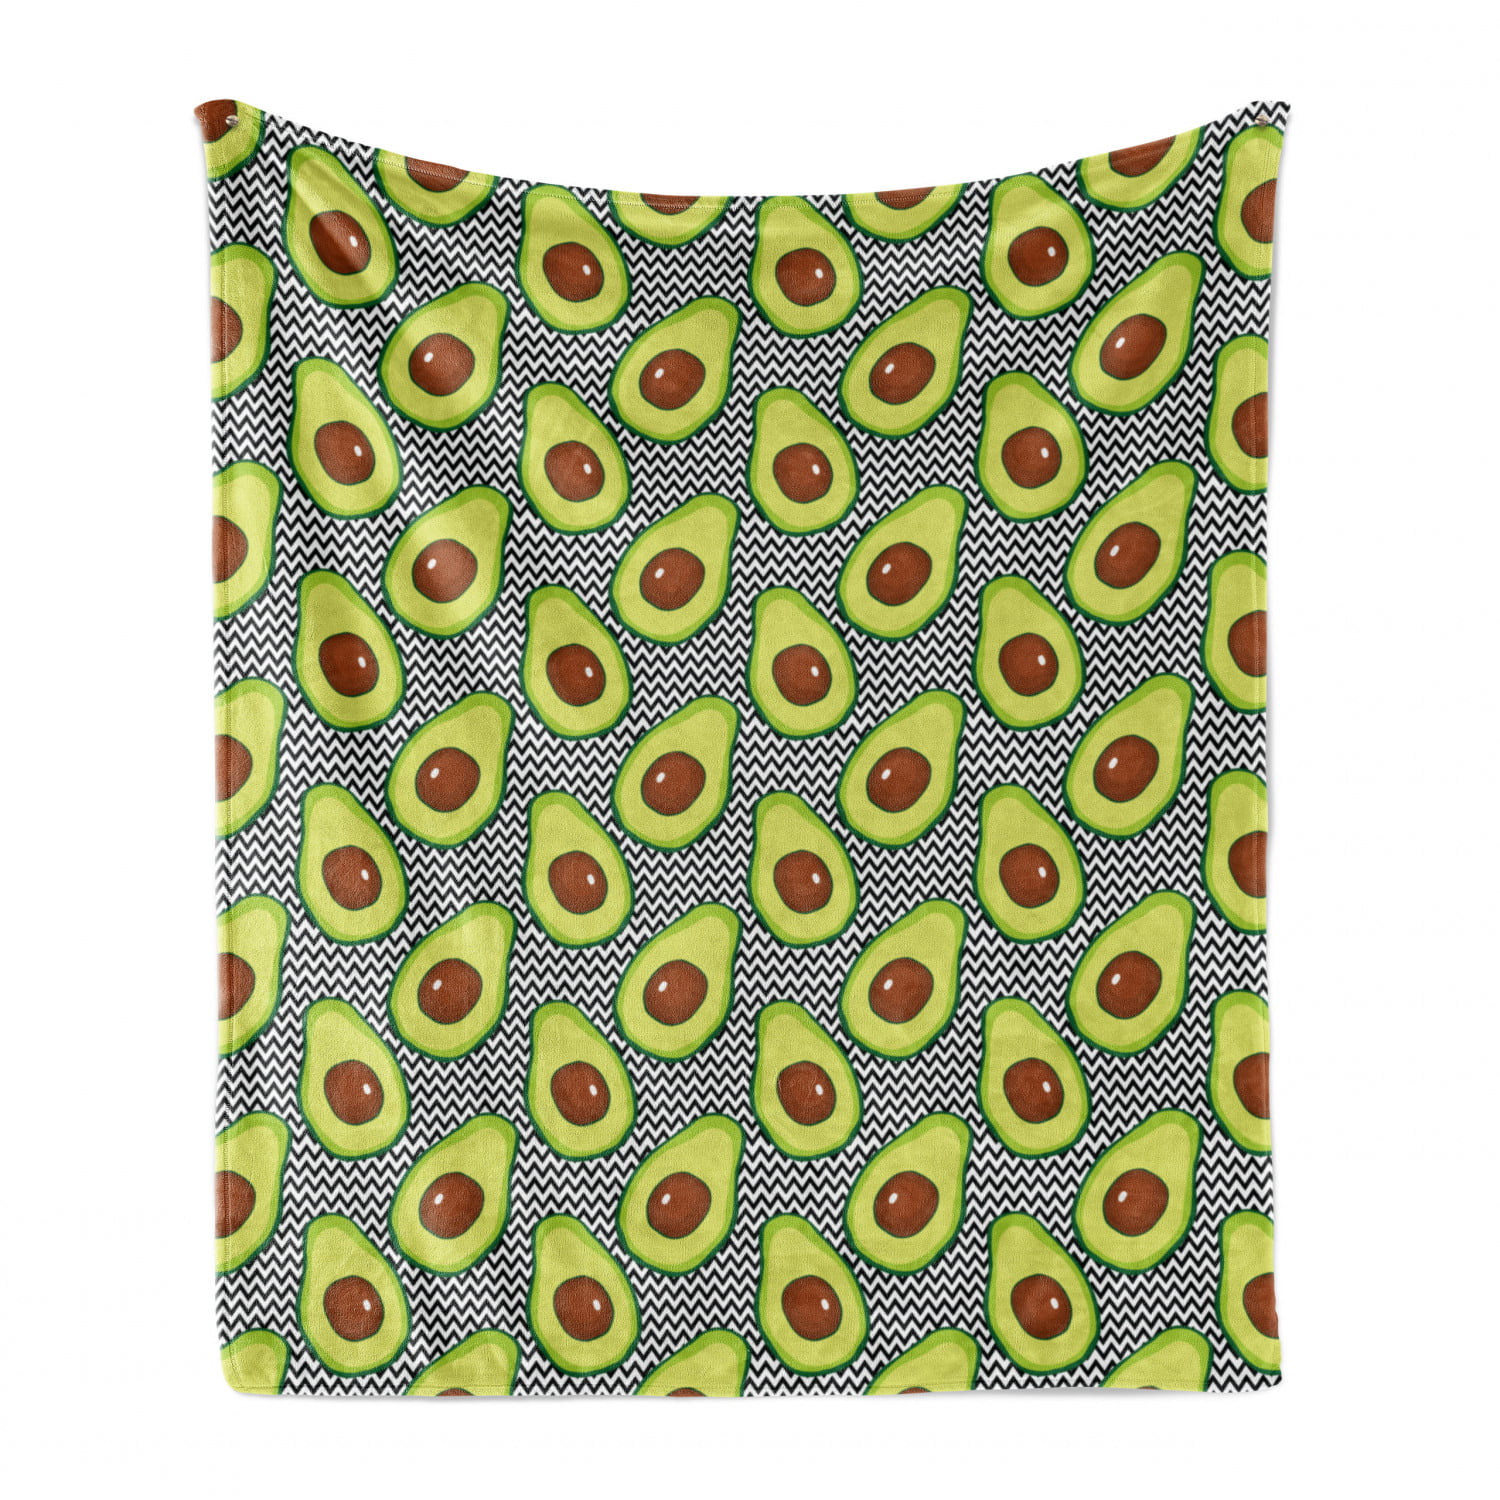 Vacu Avocado Lover Blanket Microfiber Flannel Throw Blanket Air Condition Blanket Super Soft All Season Lightweight Blanket for Bed Couch Sofa Car Office Throw 60x50